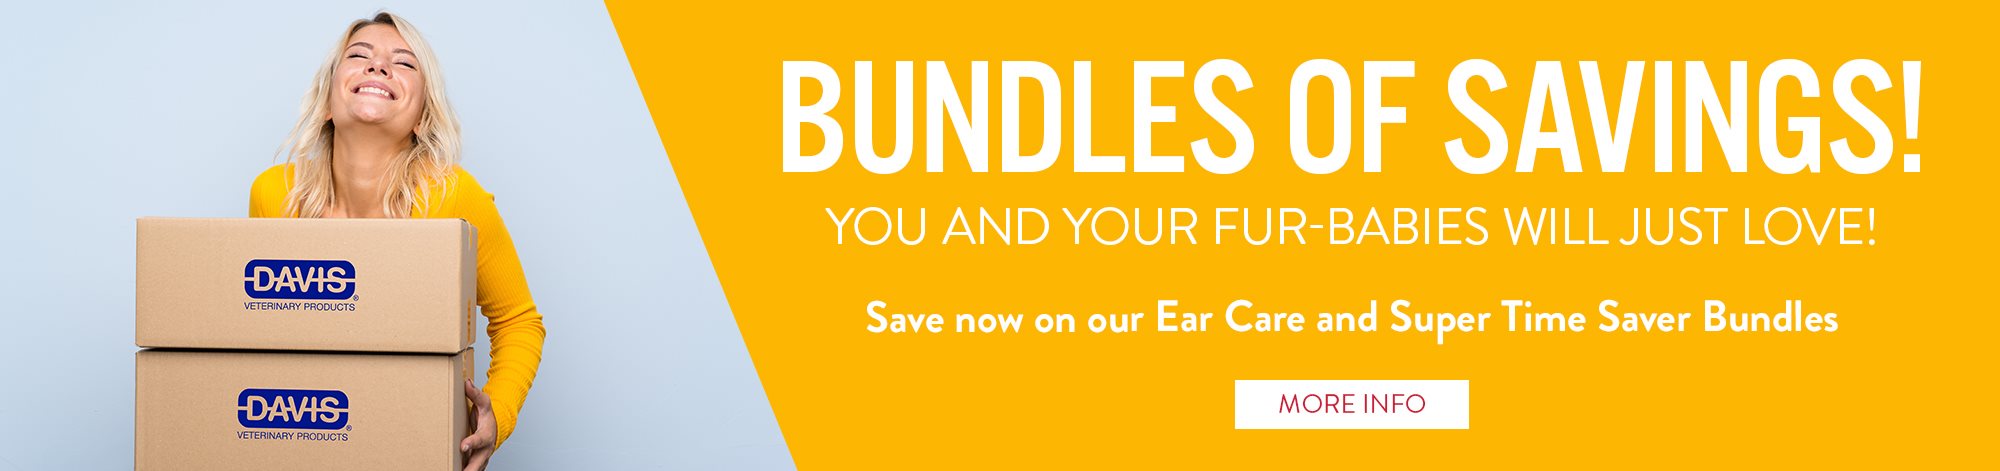 Bundles of savings! Save now on our ear care and super time saver bund